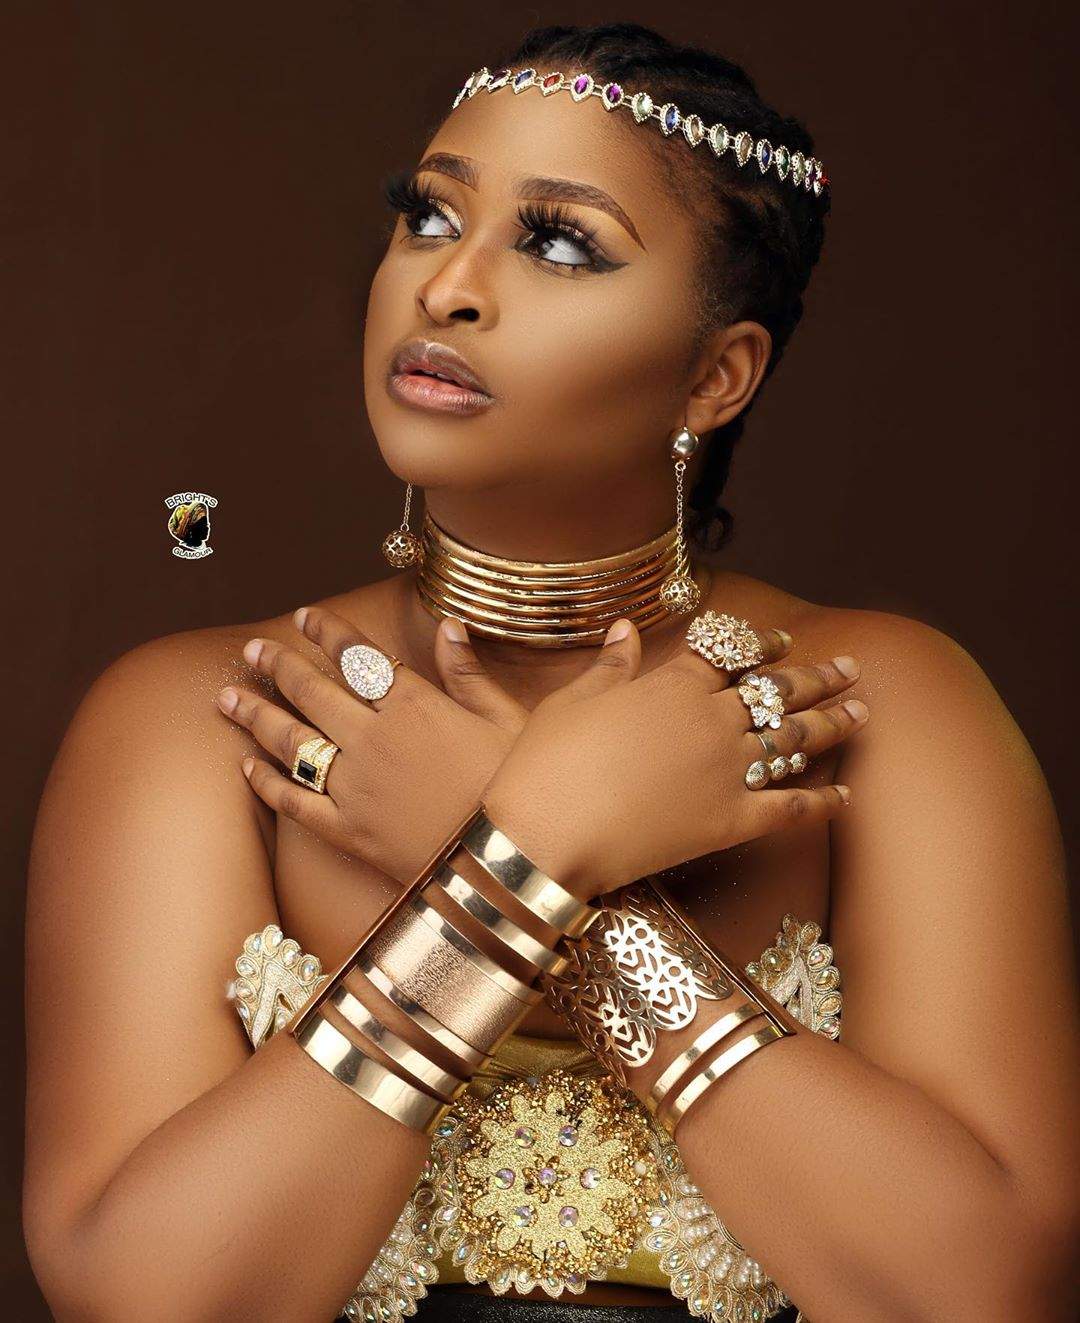 'I've experienced the pleasant and unpleasant' - Etinosa says as she celebrates birthday